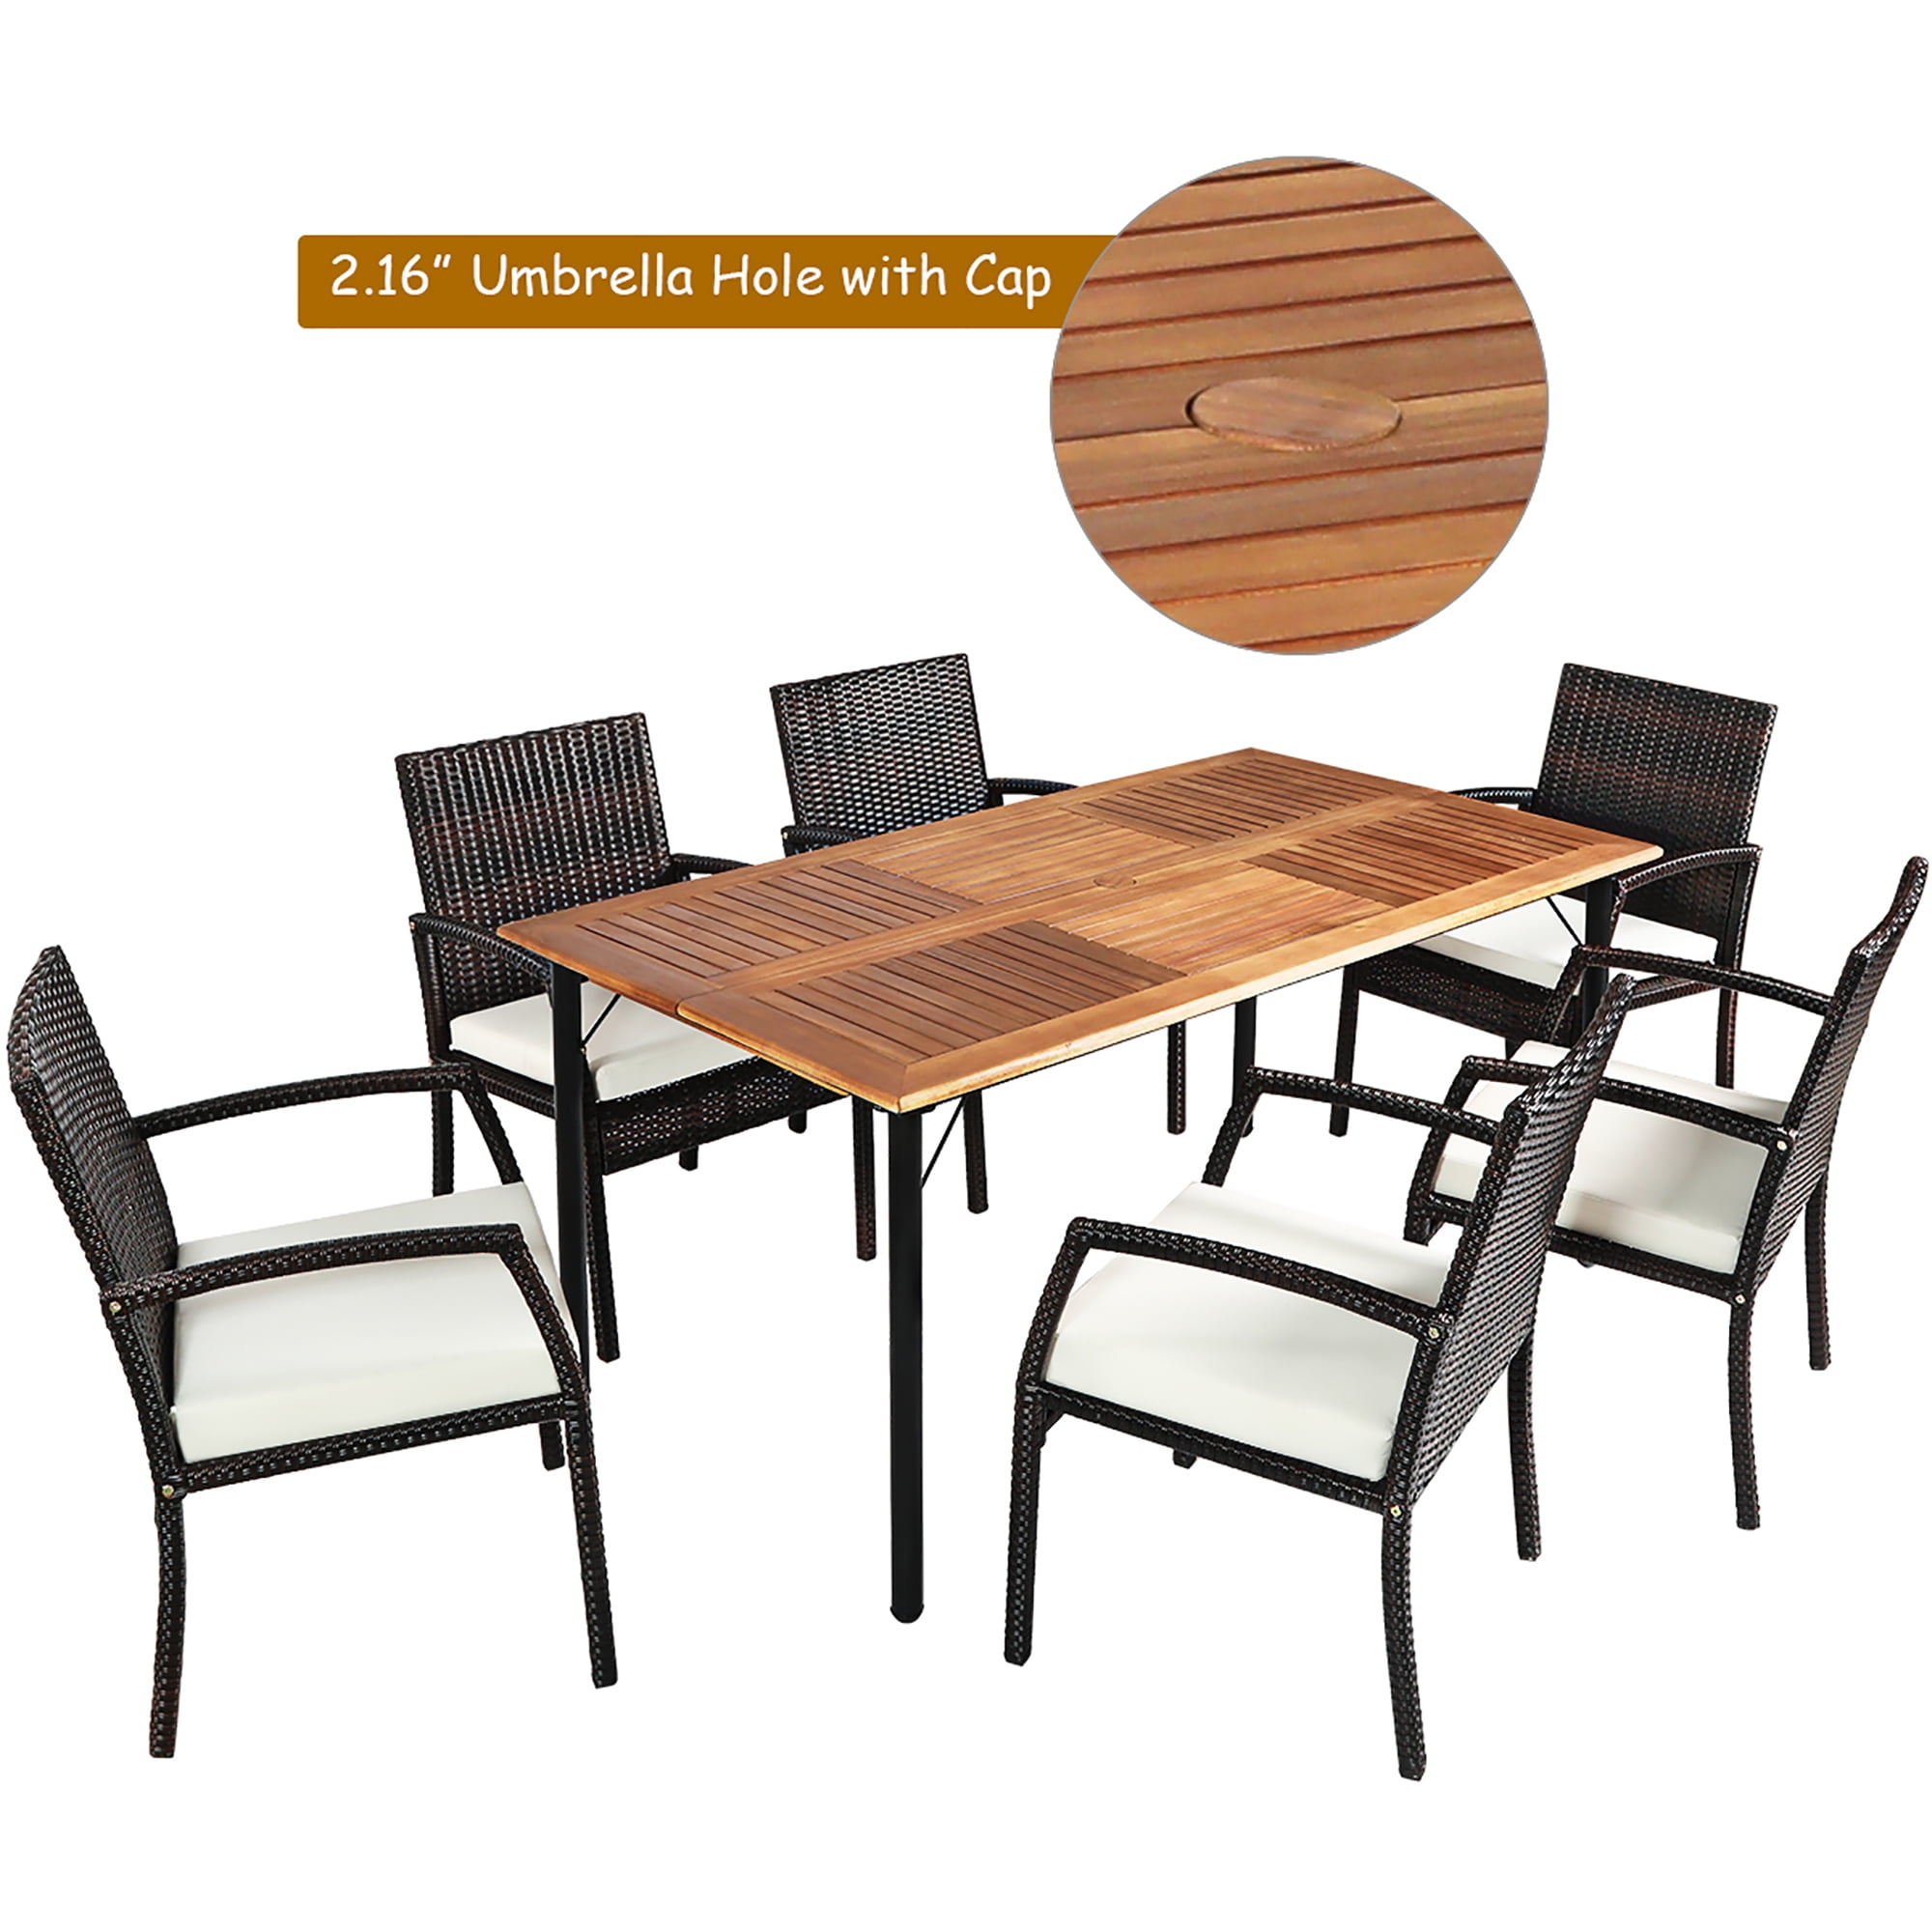 Costway 7 Pieces Patio Rattan Dining, Brown Patio Dining Table With Umbrella Hole